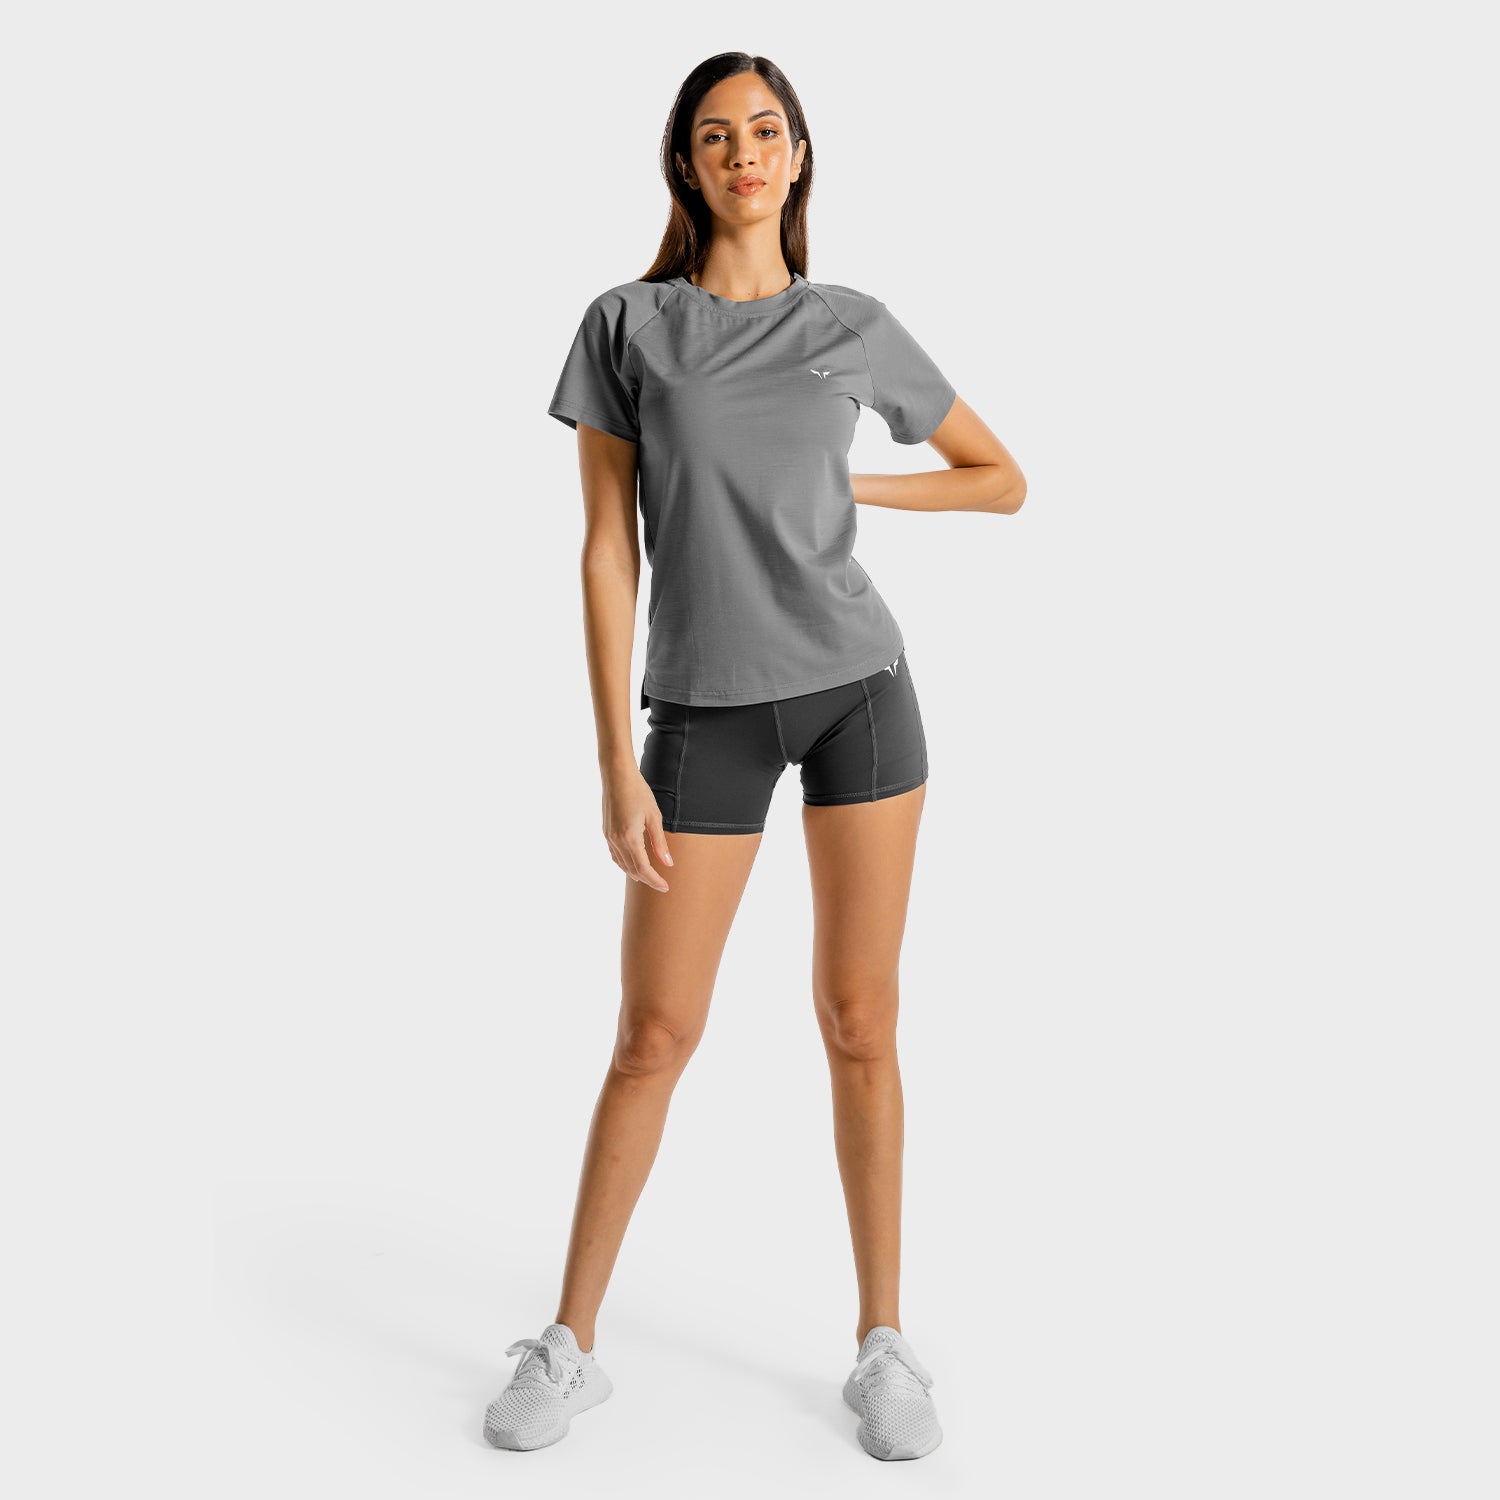 squatwolf-workout-clothes-core-slim-fit-tee-grey-gym-t-shirts-for-women